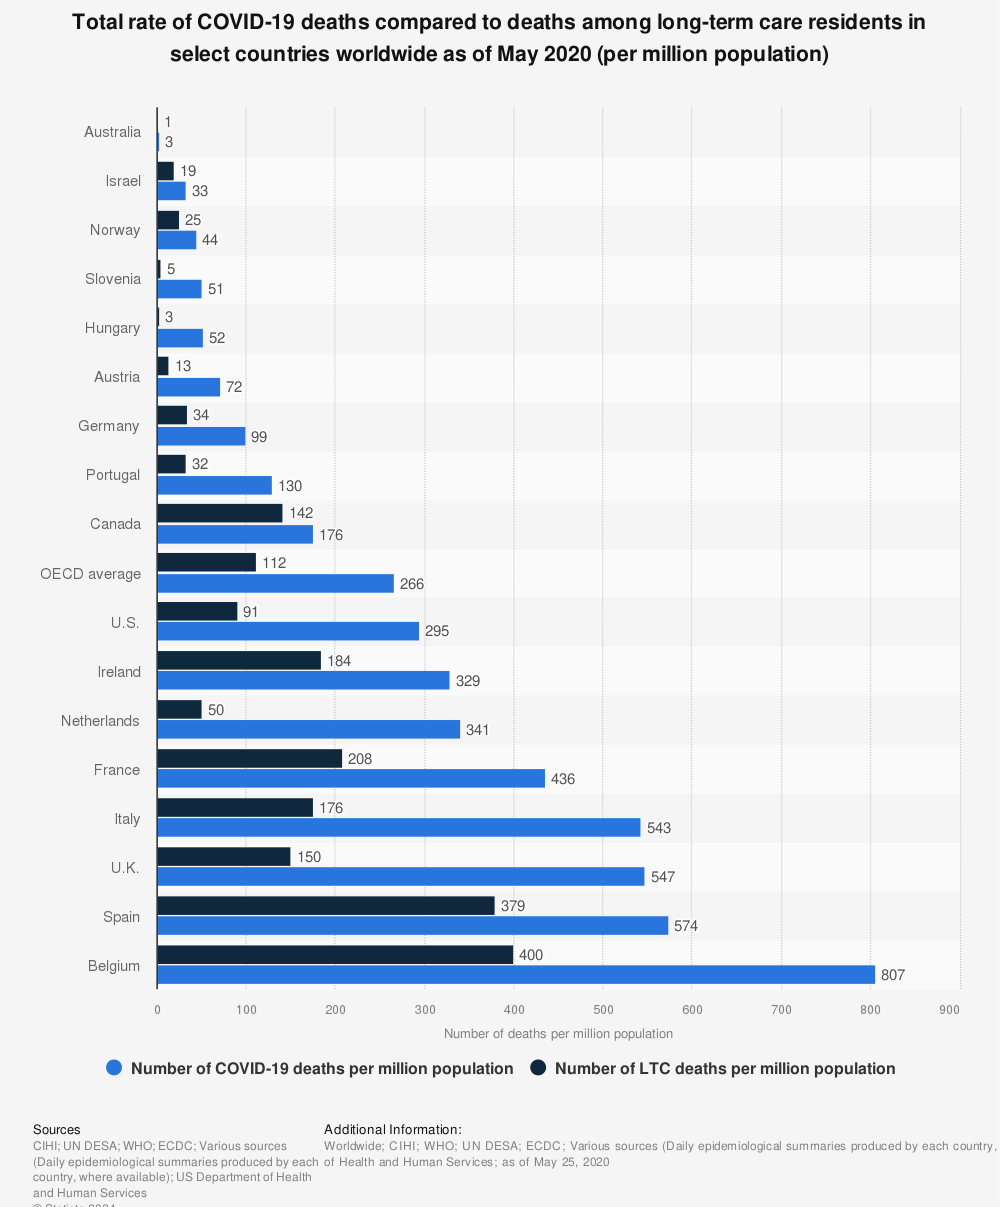 Statistic: Total rate of COVID-19 deaths compared to deaths among long-term care residents in select countries worldwide as of May 2020 (per million population) | Statista